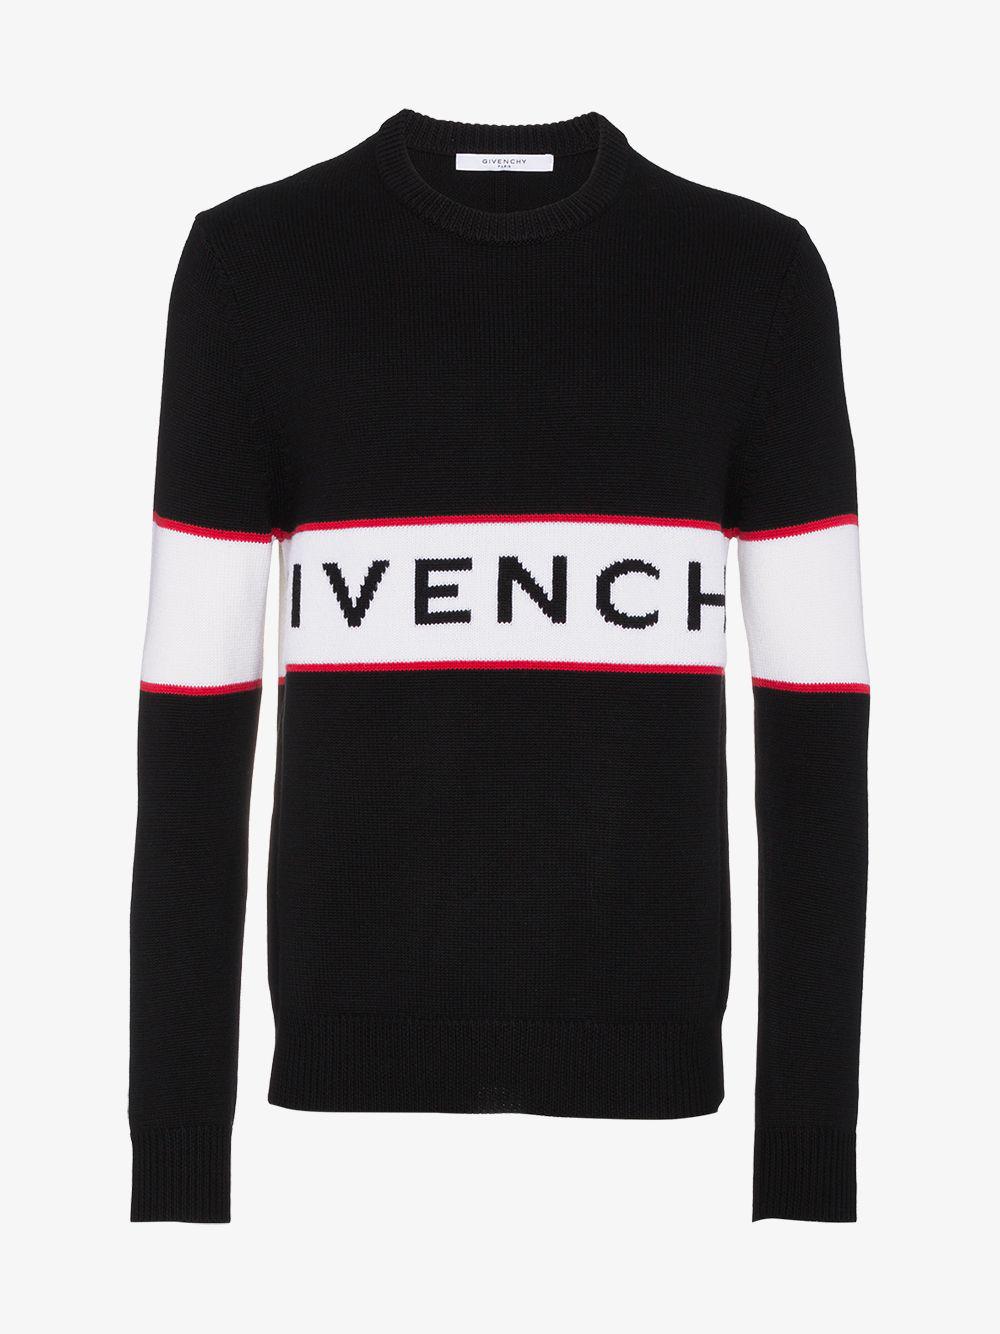 givenchy sweater for men